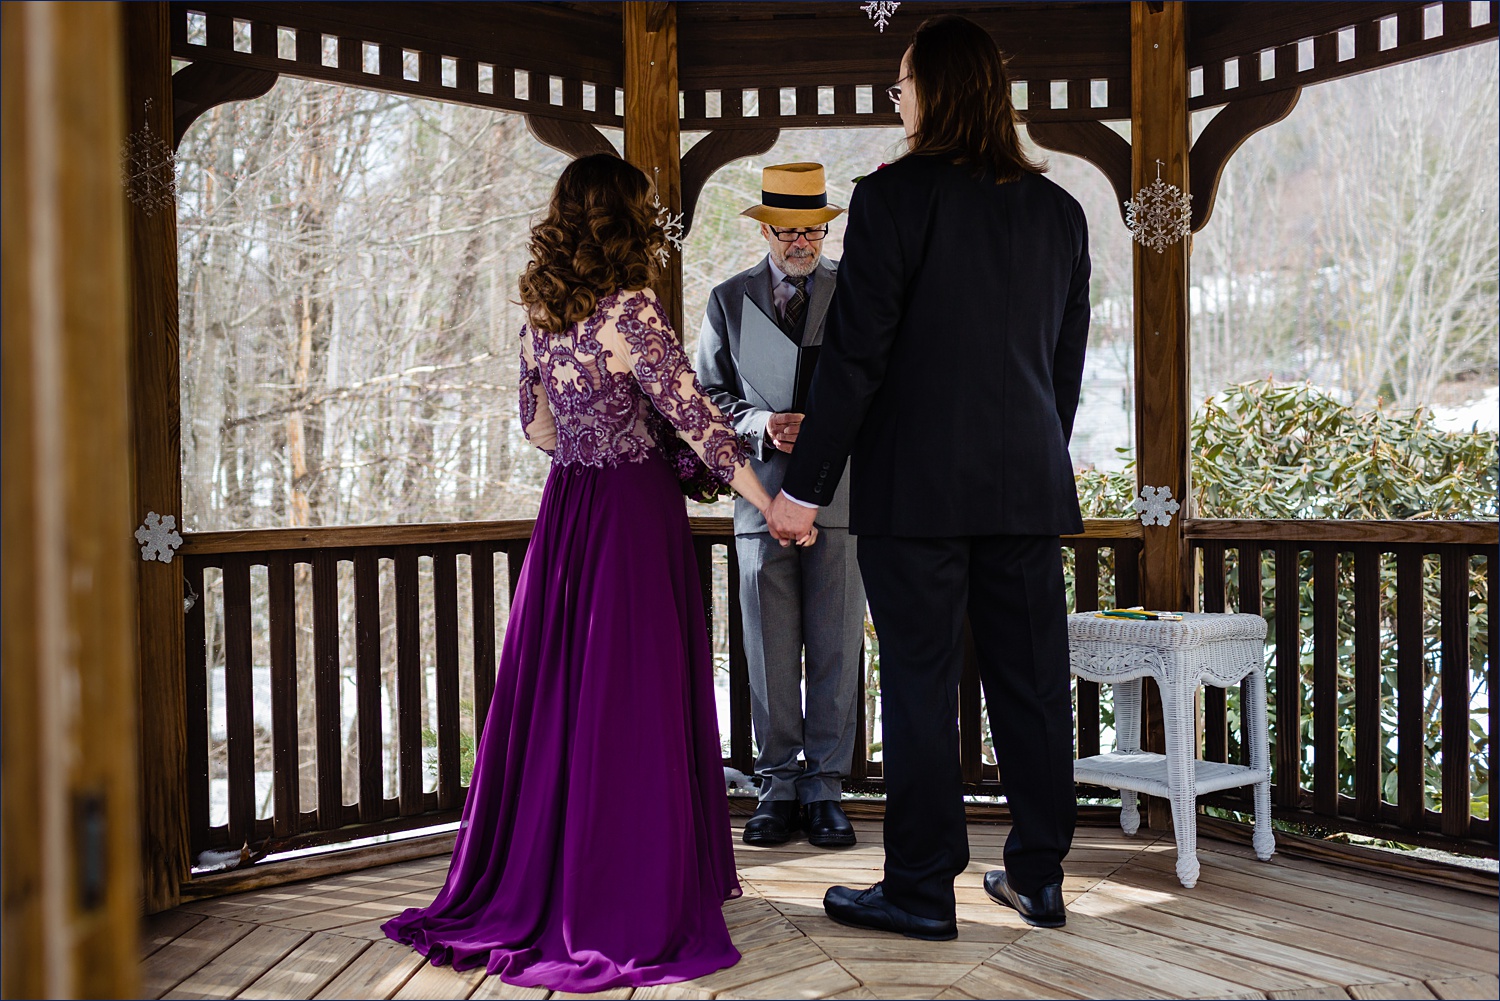 The bride and groom hold hands during their elopement ceremony outside in spring - the bride wears a purple dress